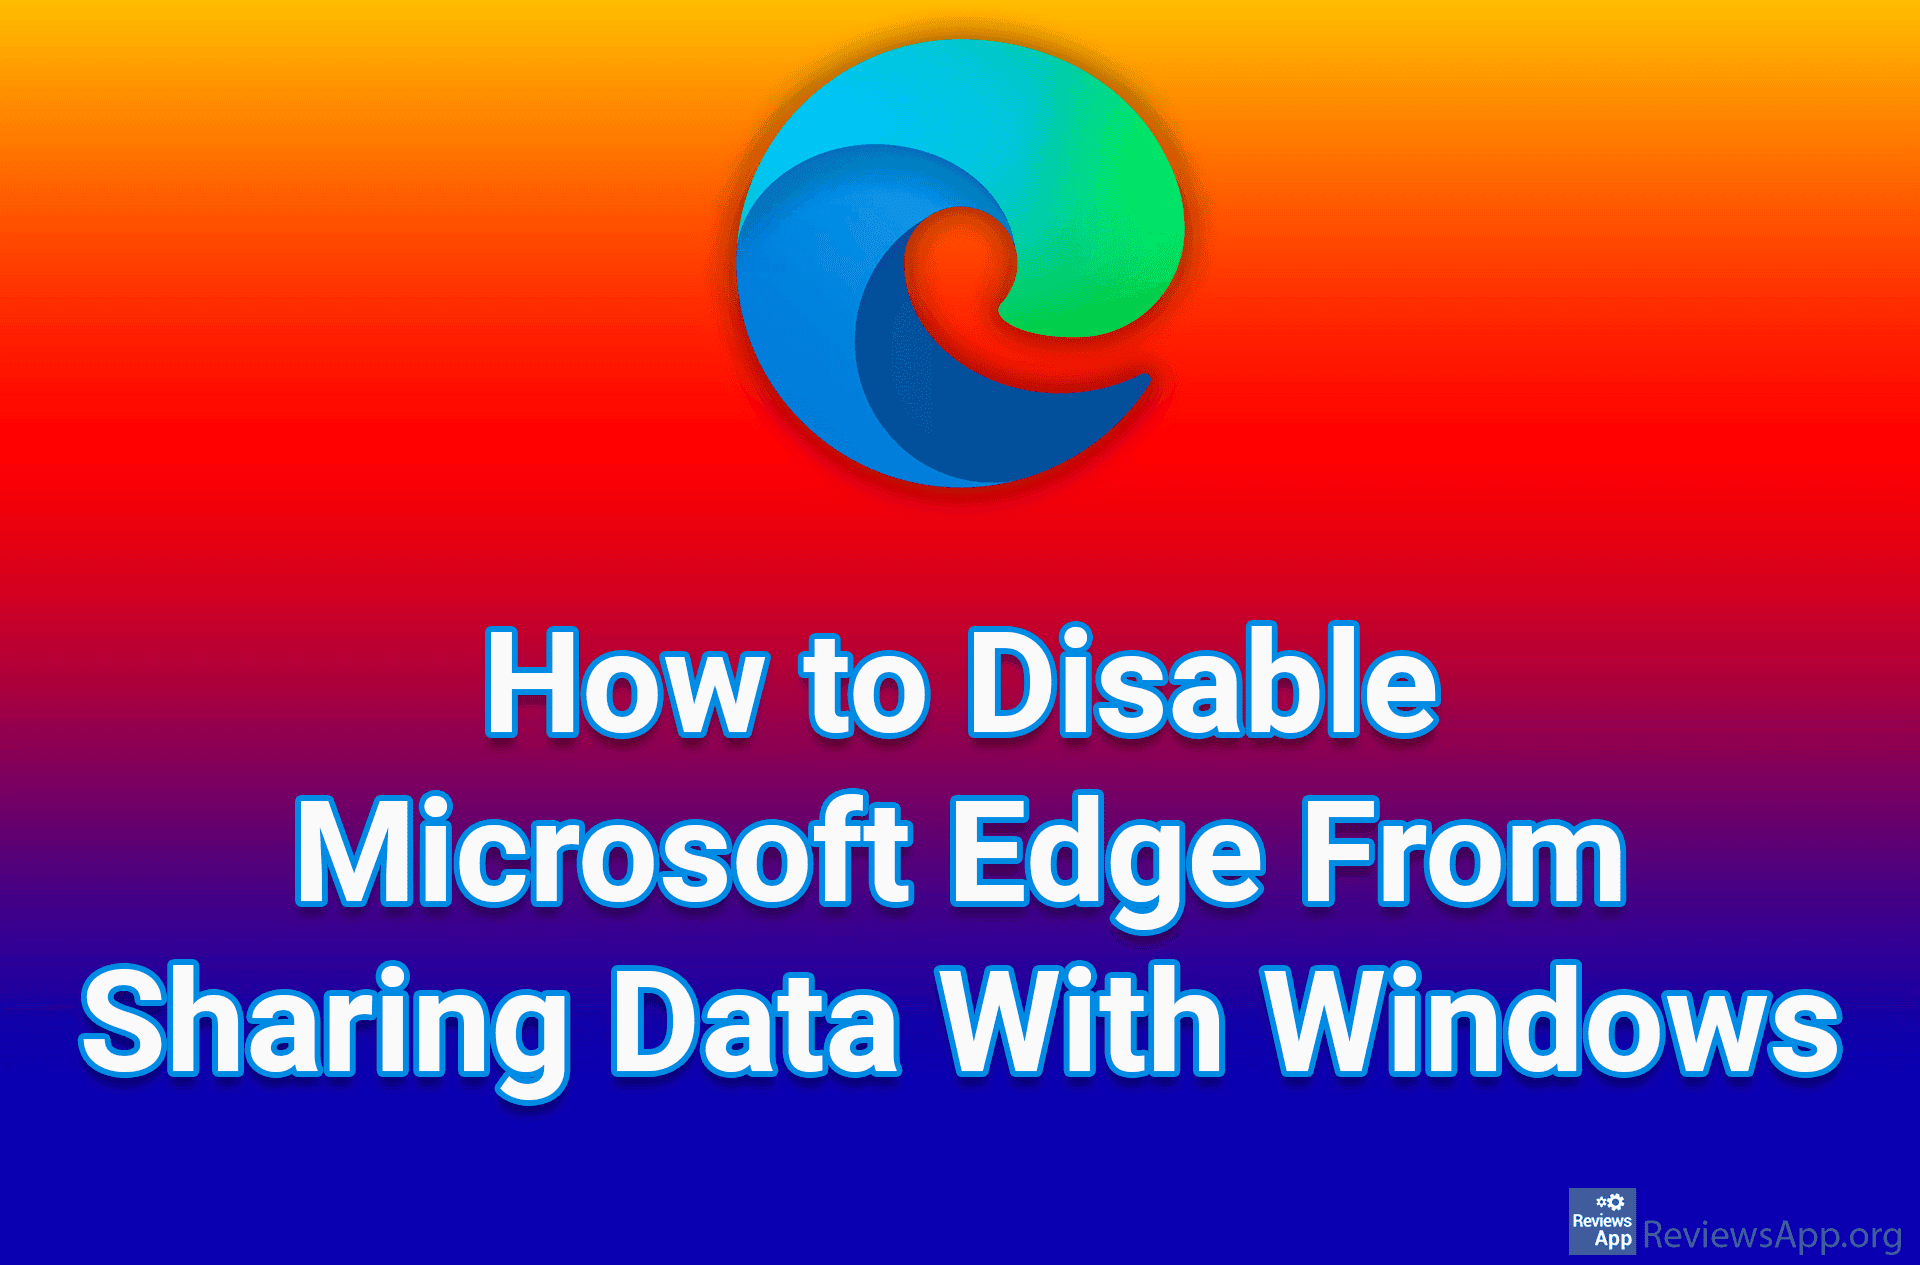 How to Disable Microsoft Edge From Sharing Data With Windows